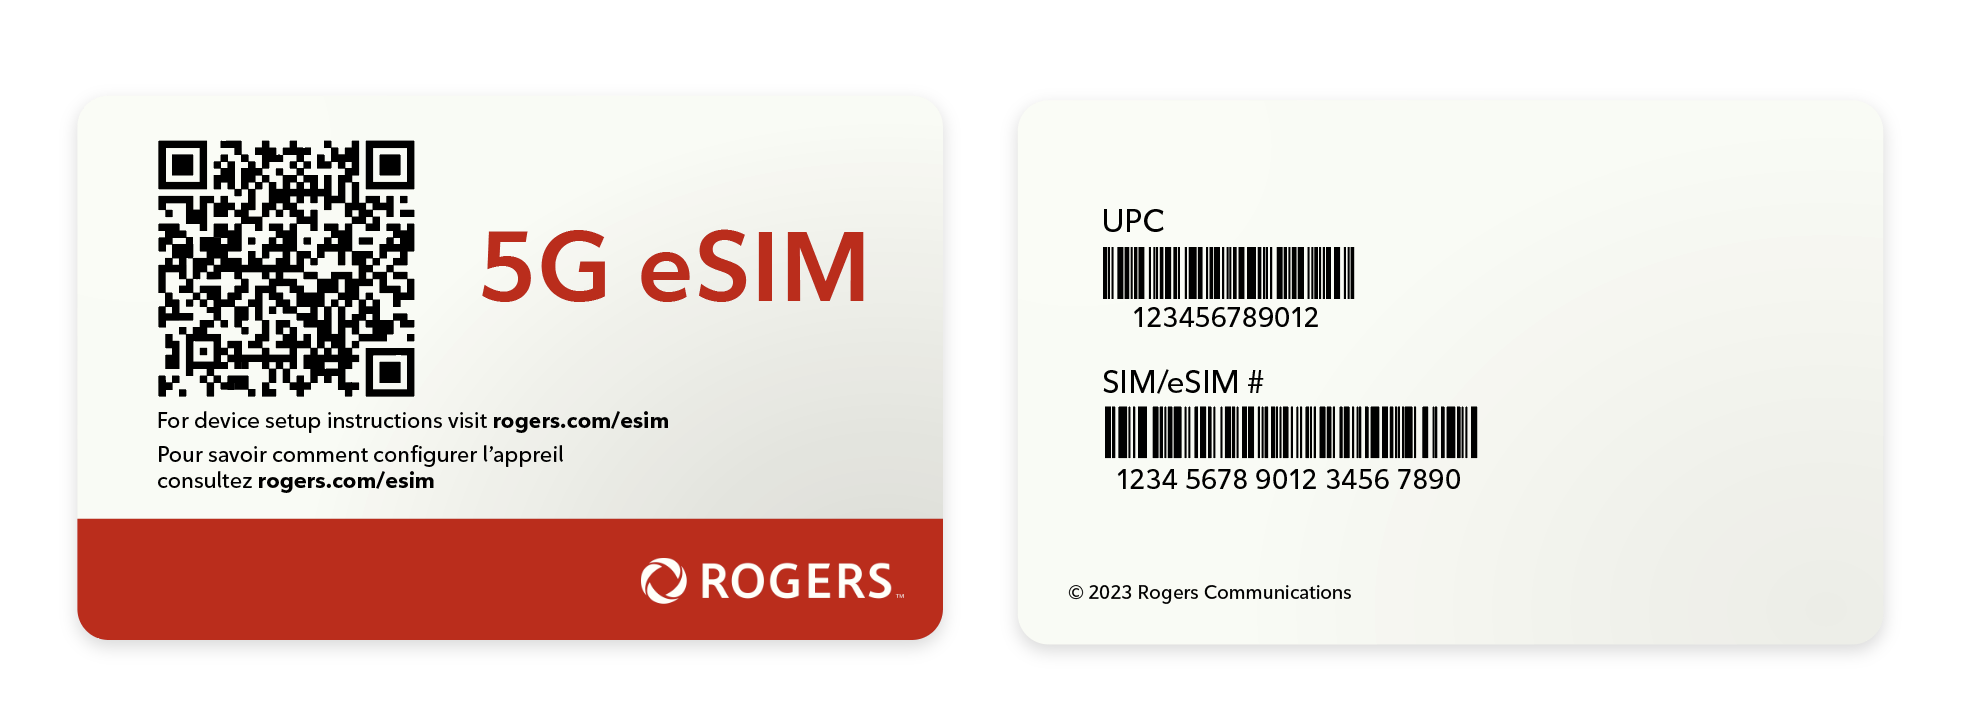 eSIM Voucher- Front and Back 